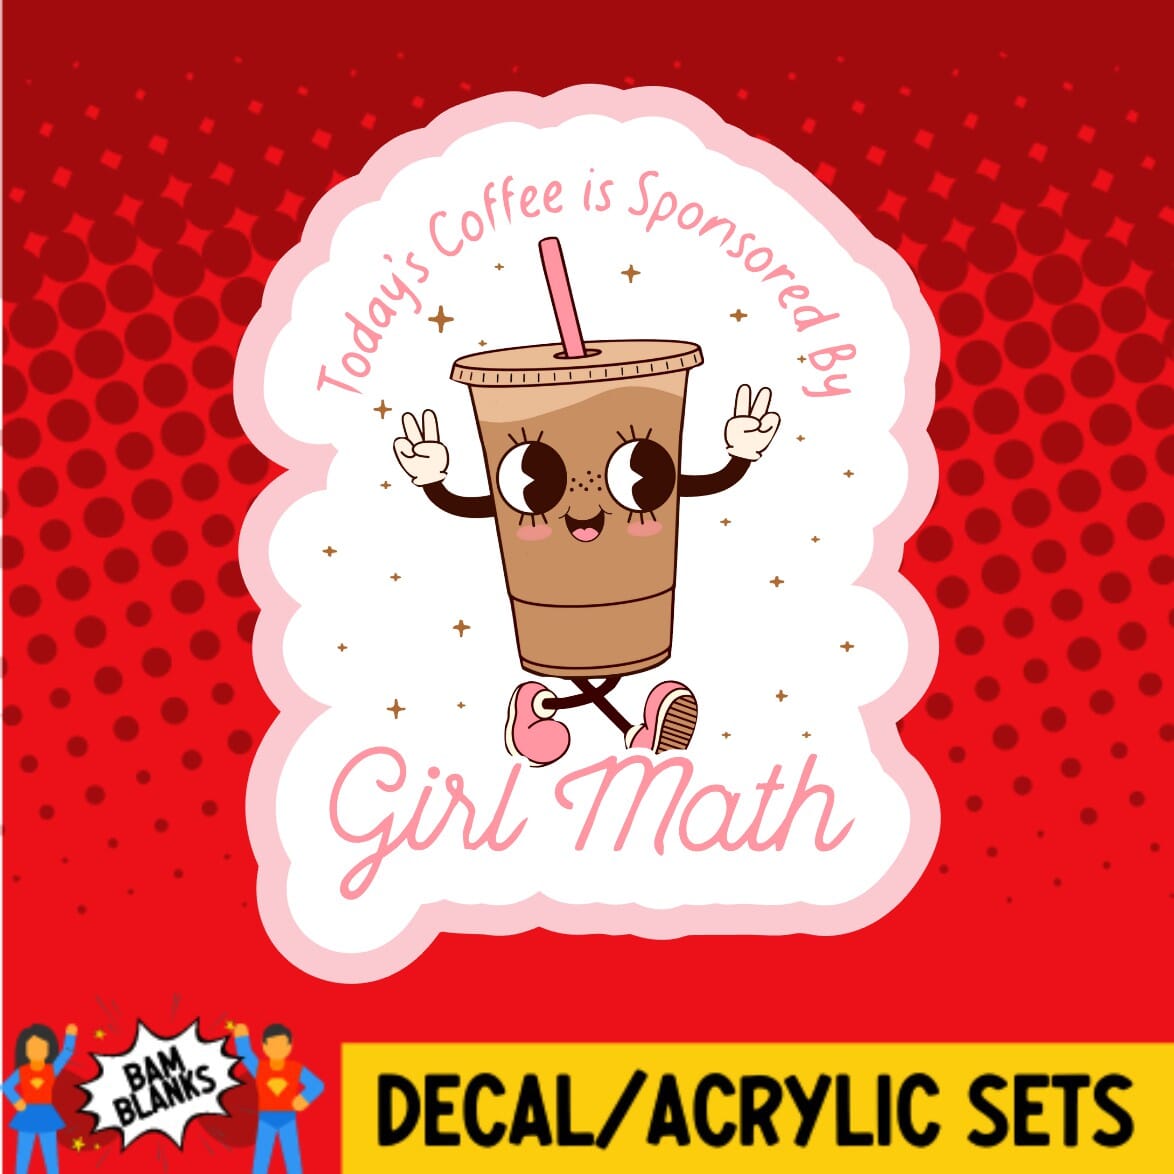 Todays Coffee is Sponsored by Girl Math - DECAL AND ACRYLIC SHAPE #DA01677